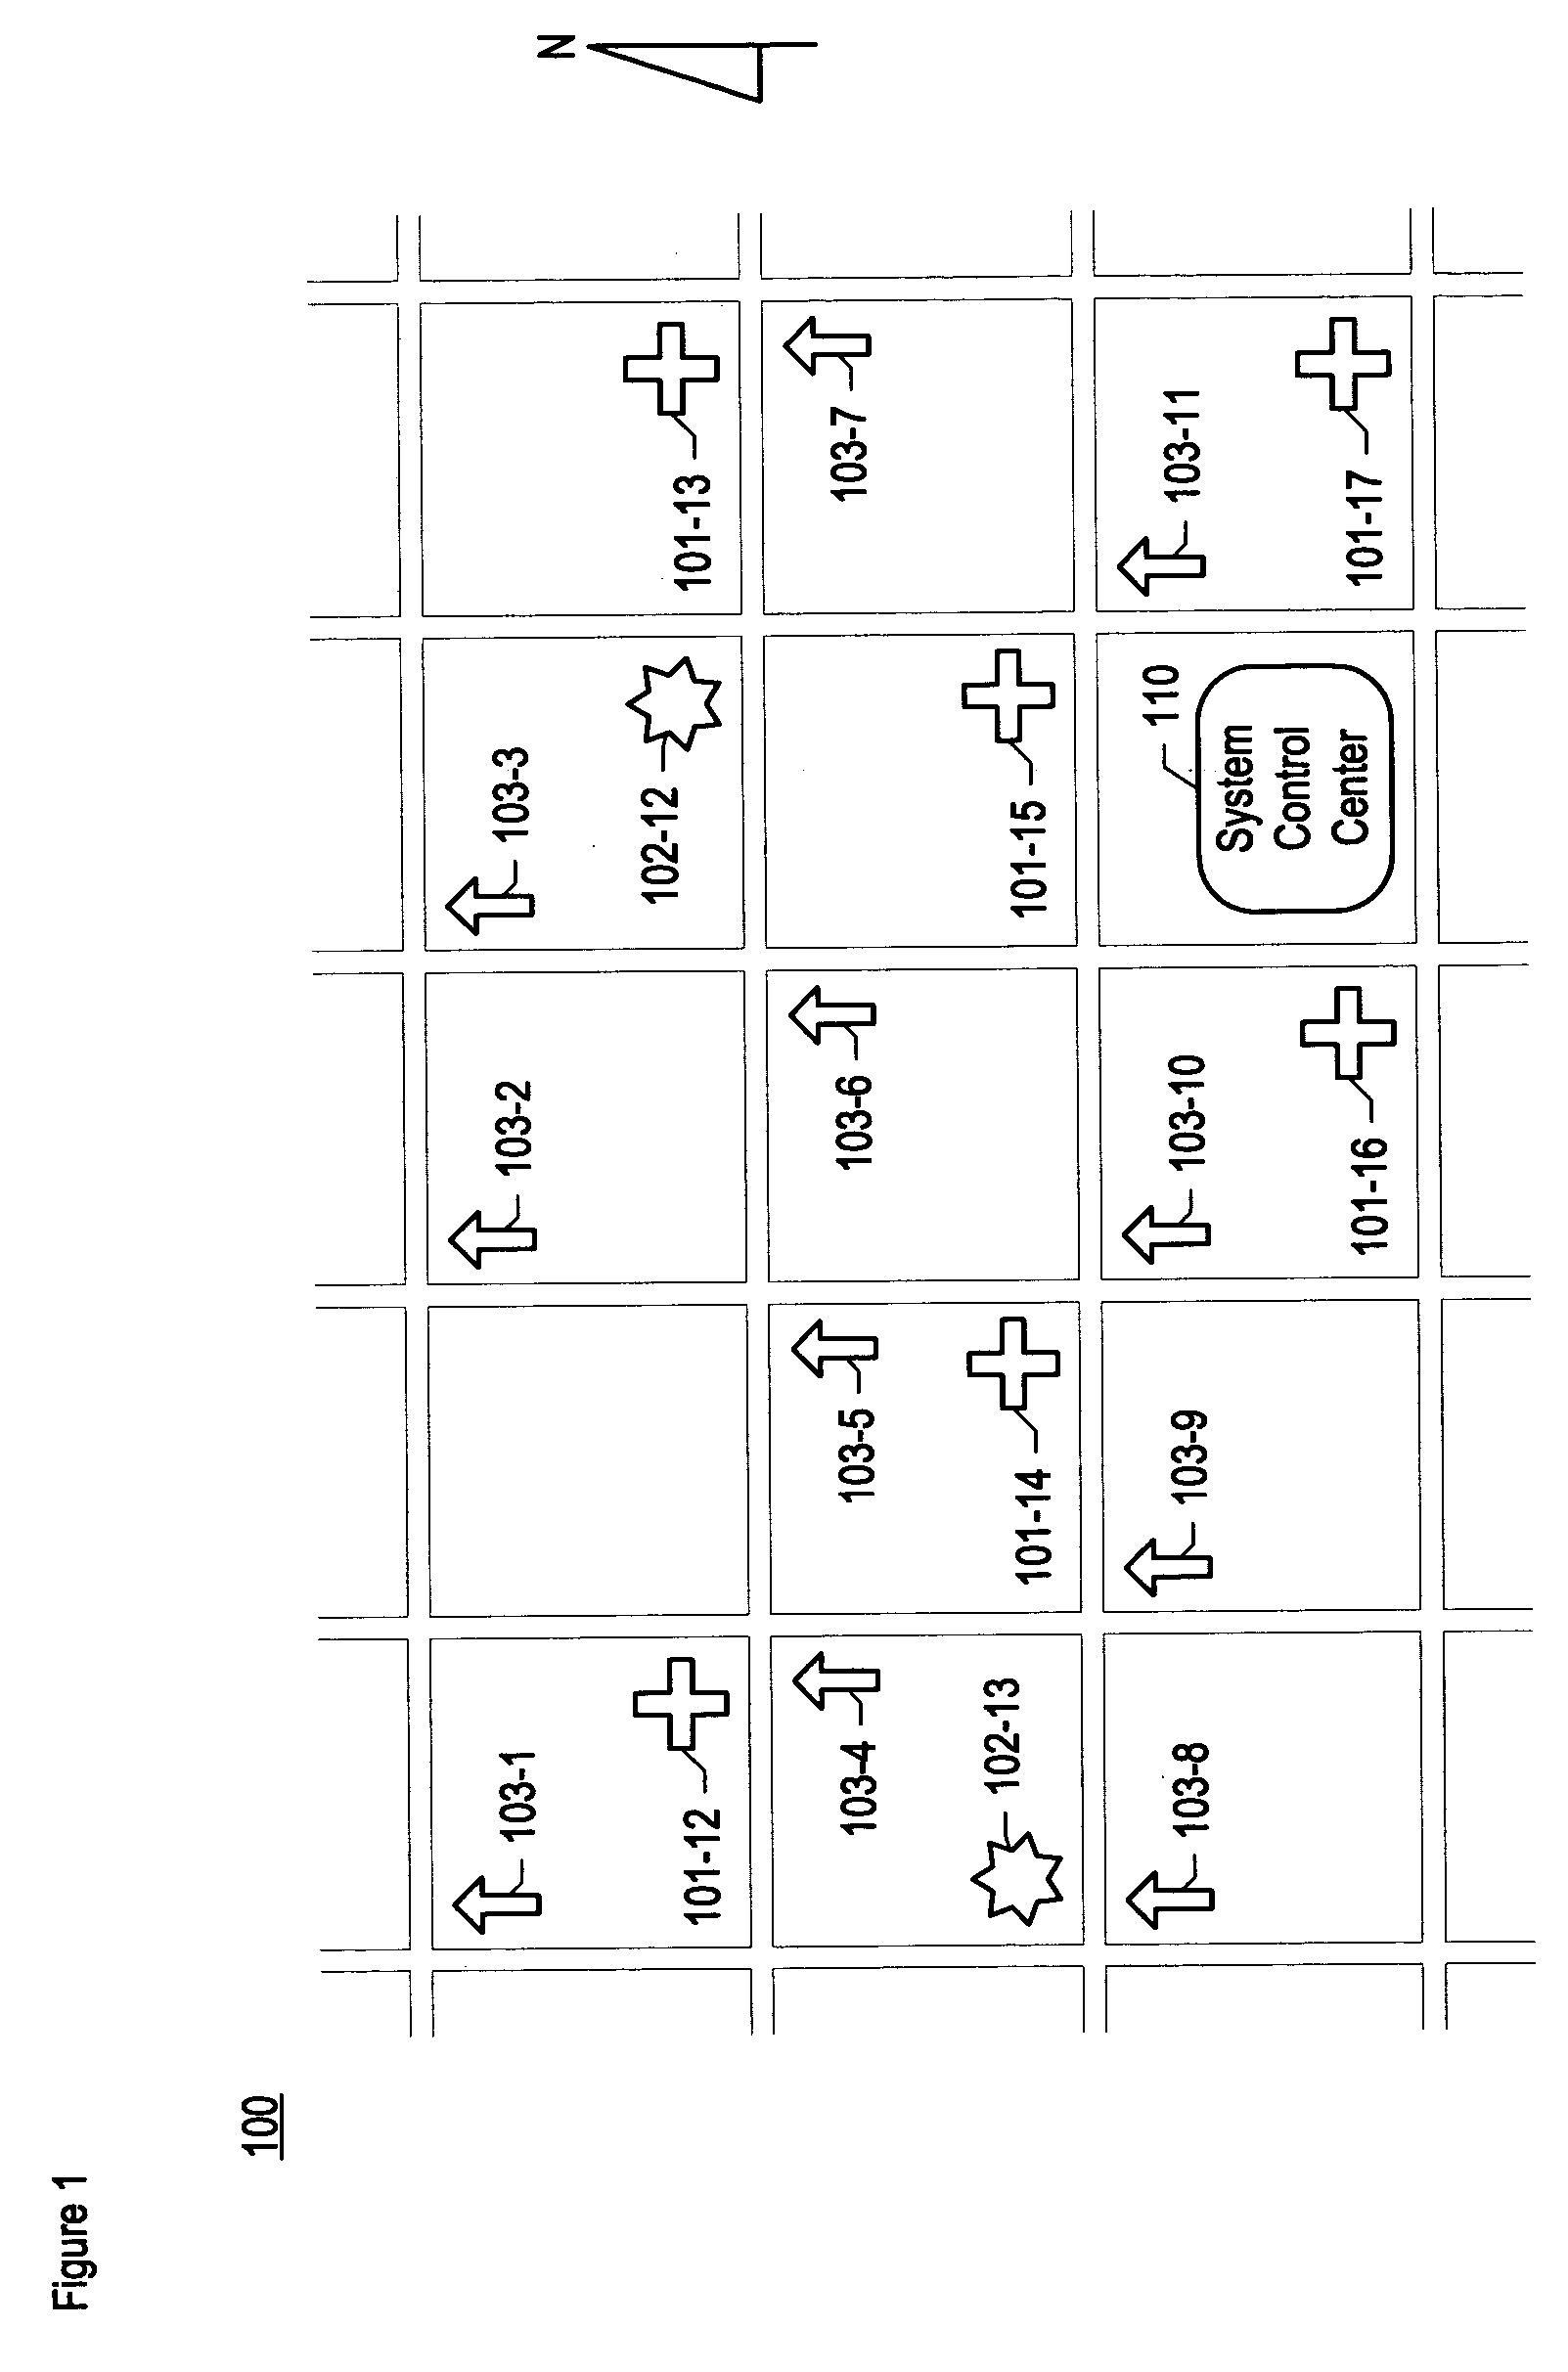 Chemical, biological, radiological, and nuclear weapon detection system with alarm thresholds based on environmental factors